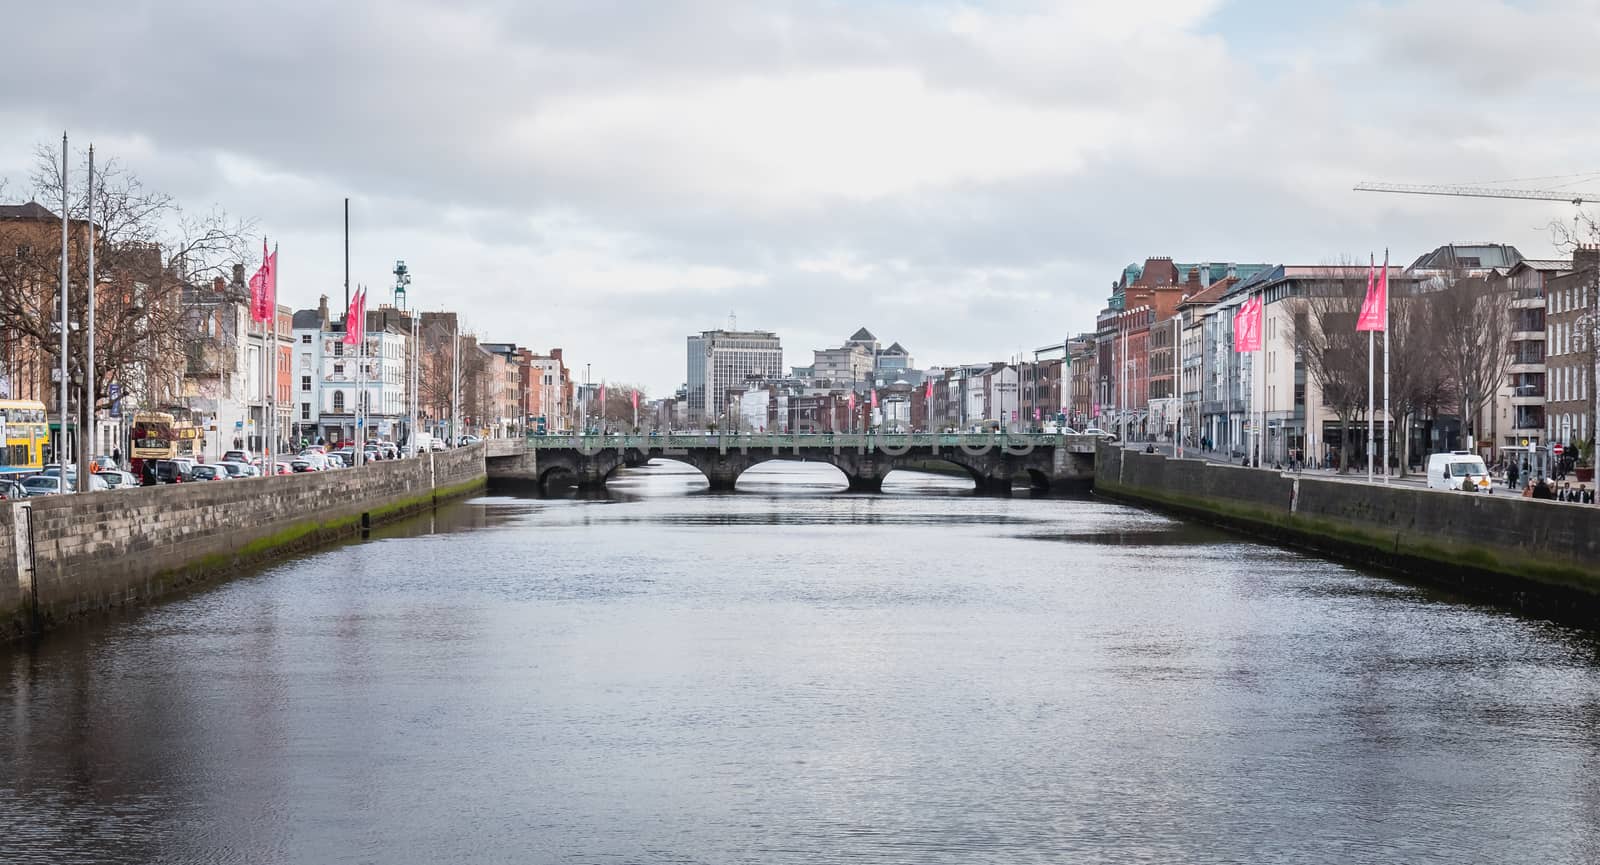 Dublin, Ireland - February 16, 2019: mix of modern and old architecture along the Liffey River in the city center on a winter day